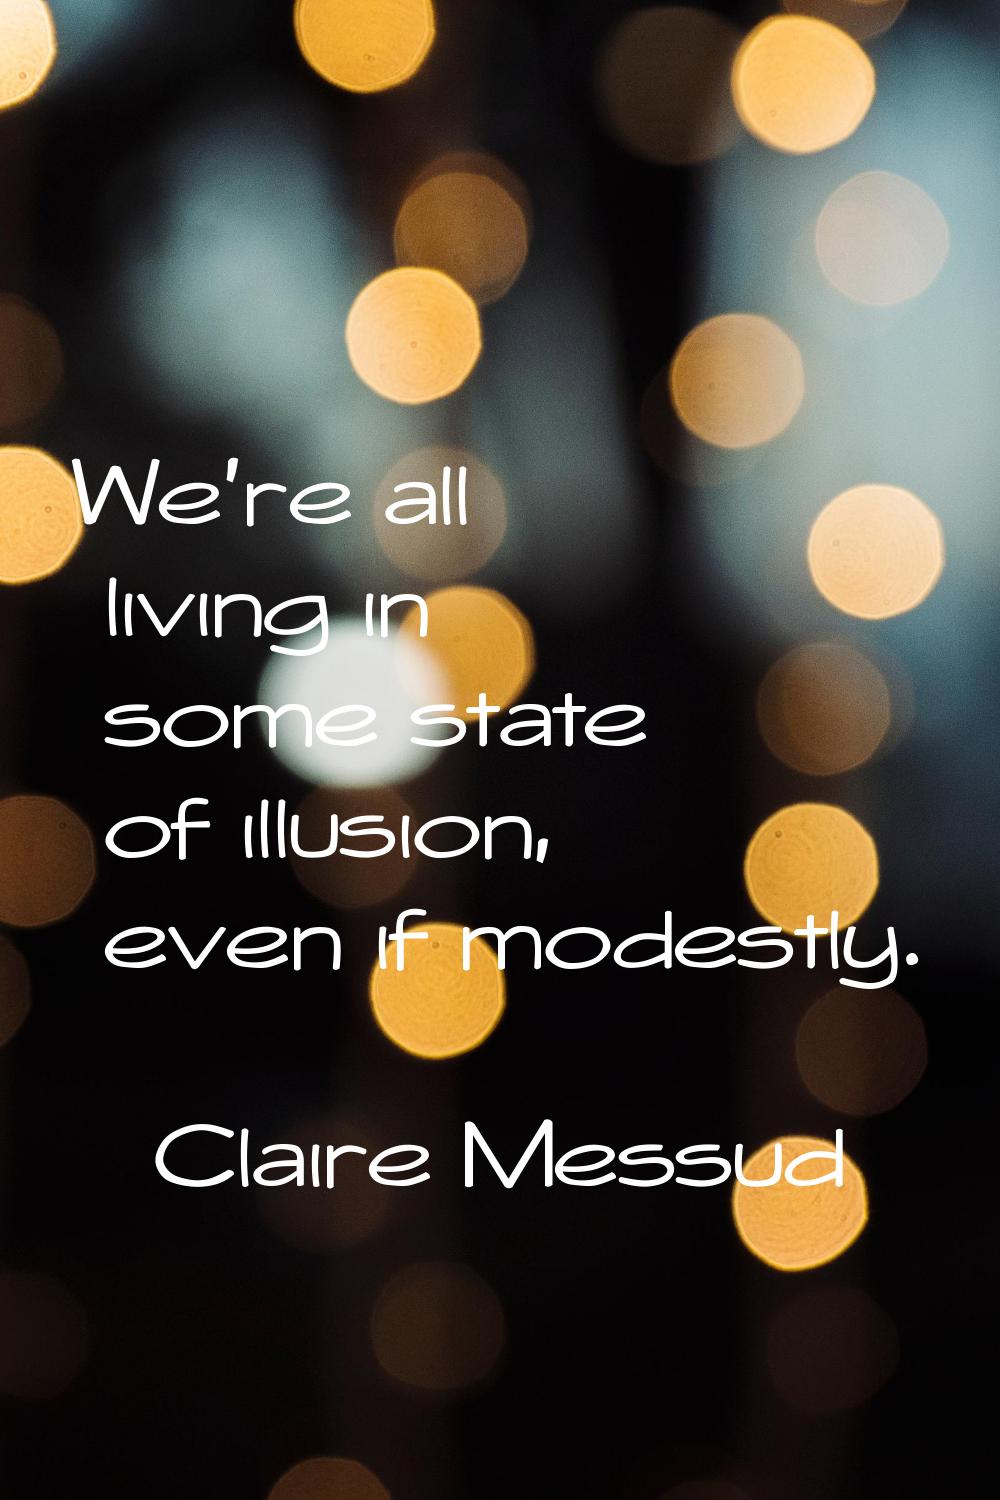 We're all living in some state of illusion, even if modestly.